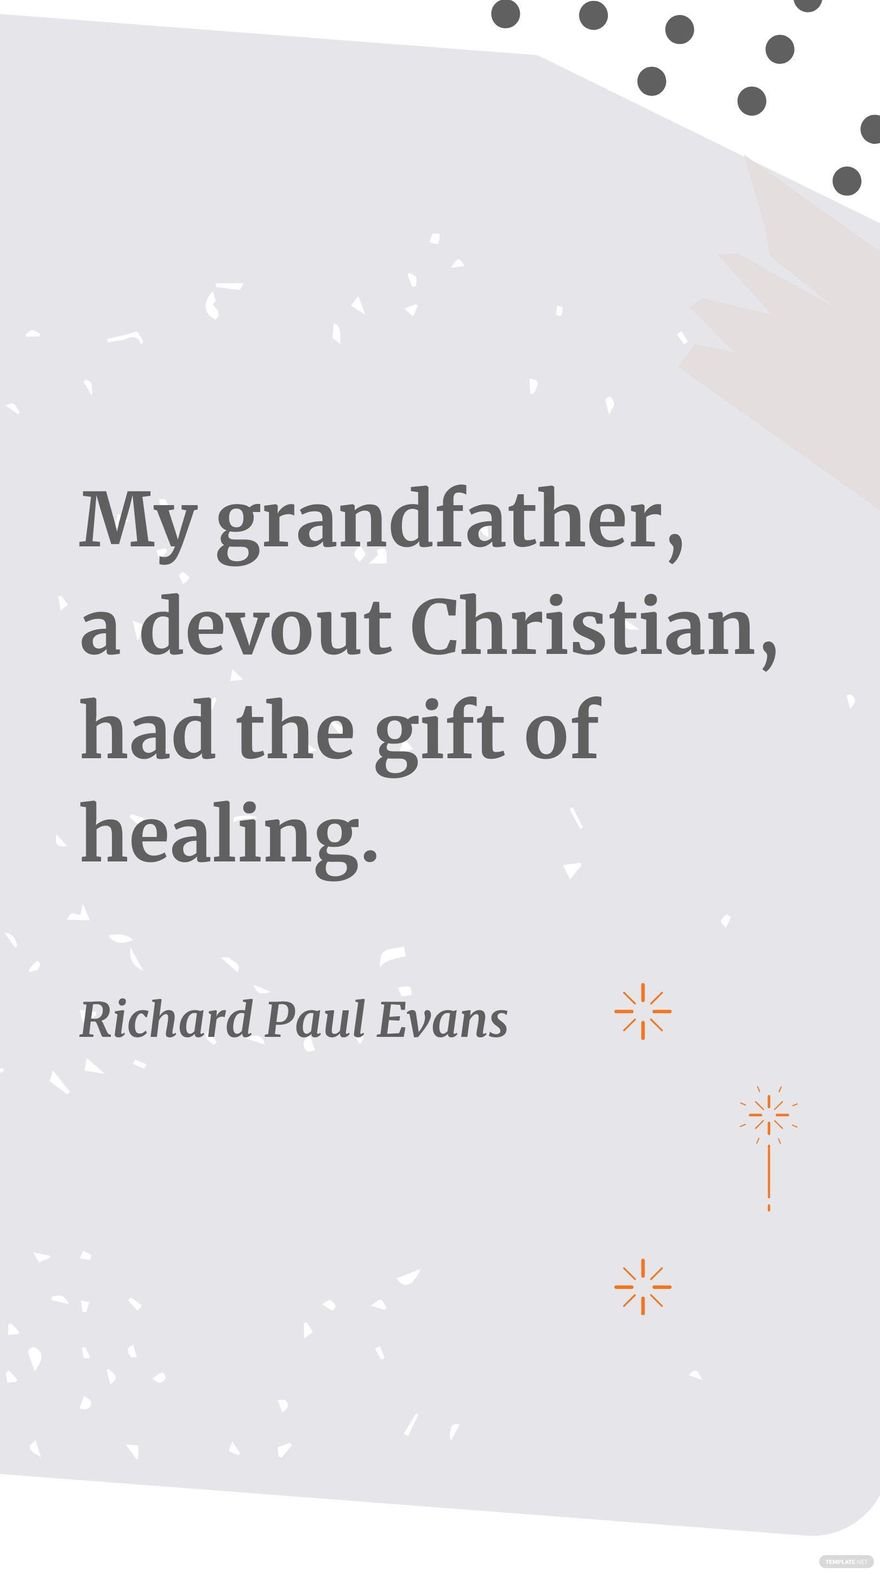 Richard Paul Evans - My grandfather, a devout Christian, had the gift of healing. in JPG